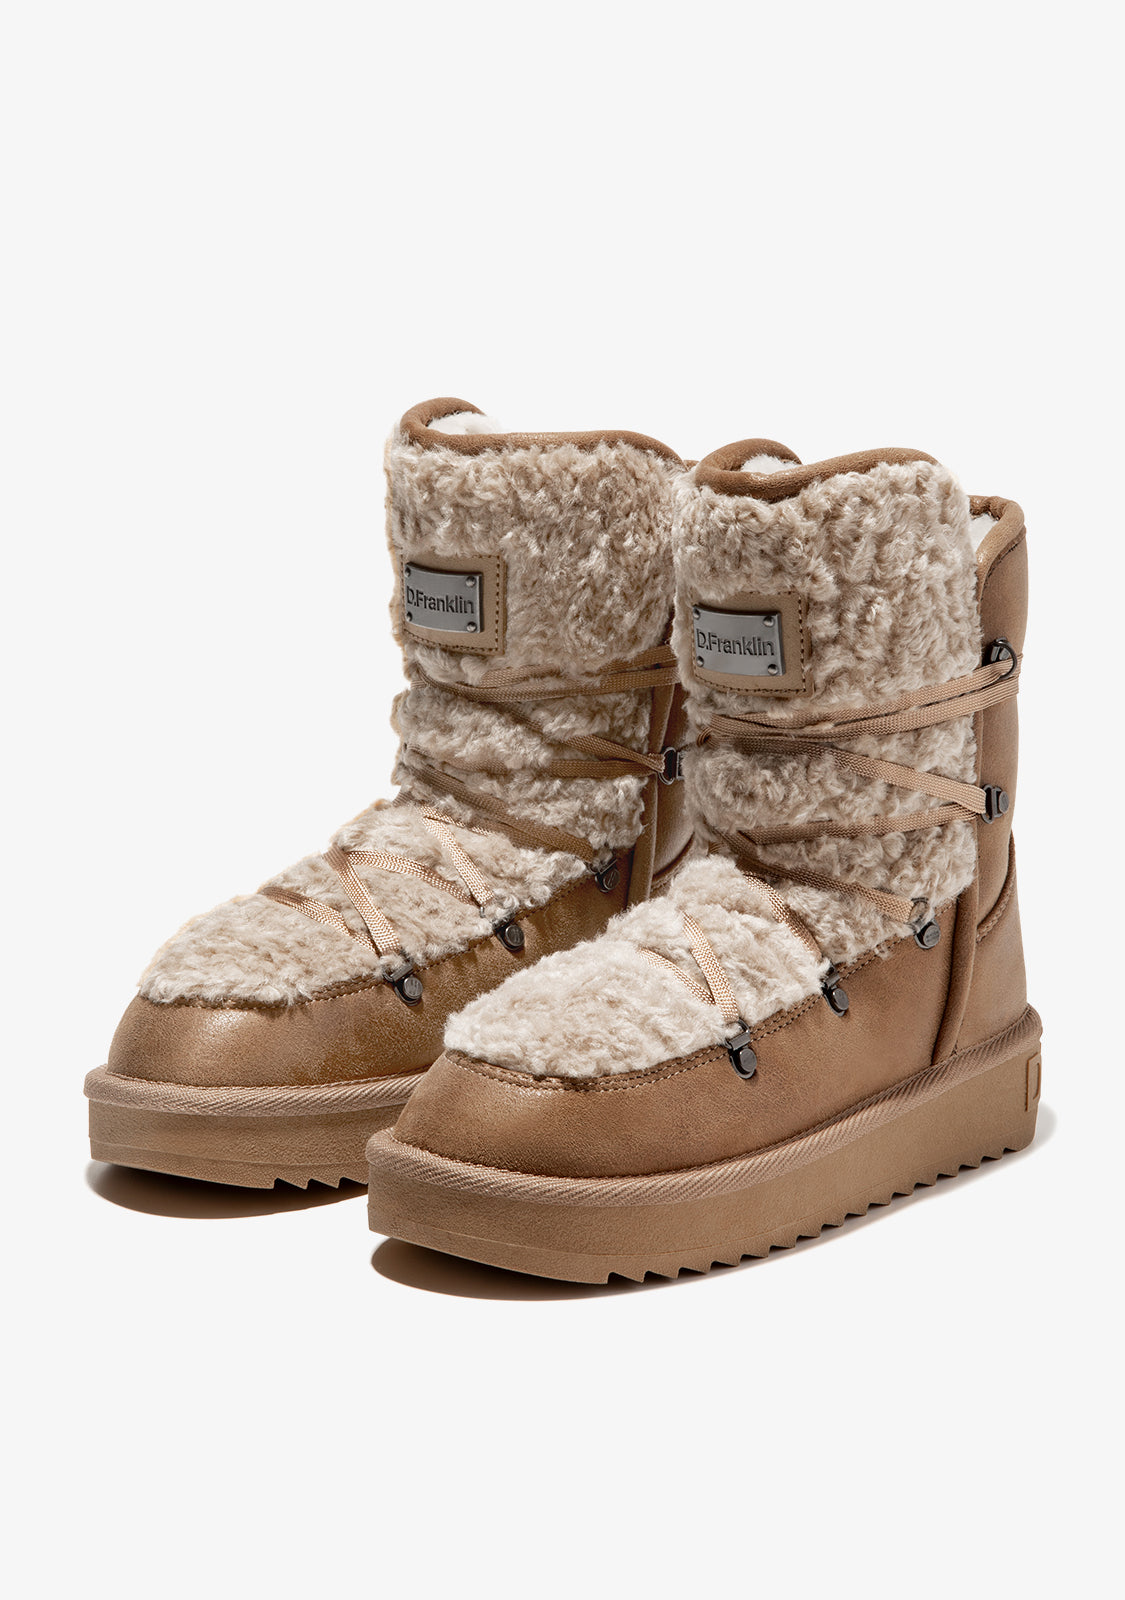 D.Franklin - ❄Nordic 19 Fur Nut❄, The boots that will go with you along  the way, no matter the obstacle. Last units in dfrankl.in/1412EN